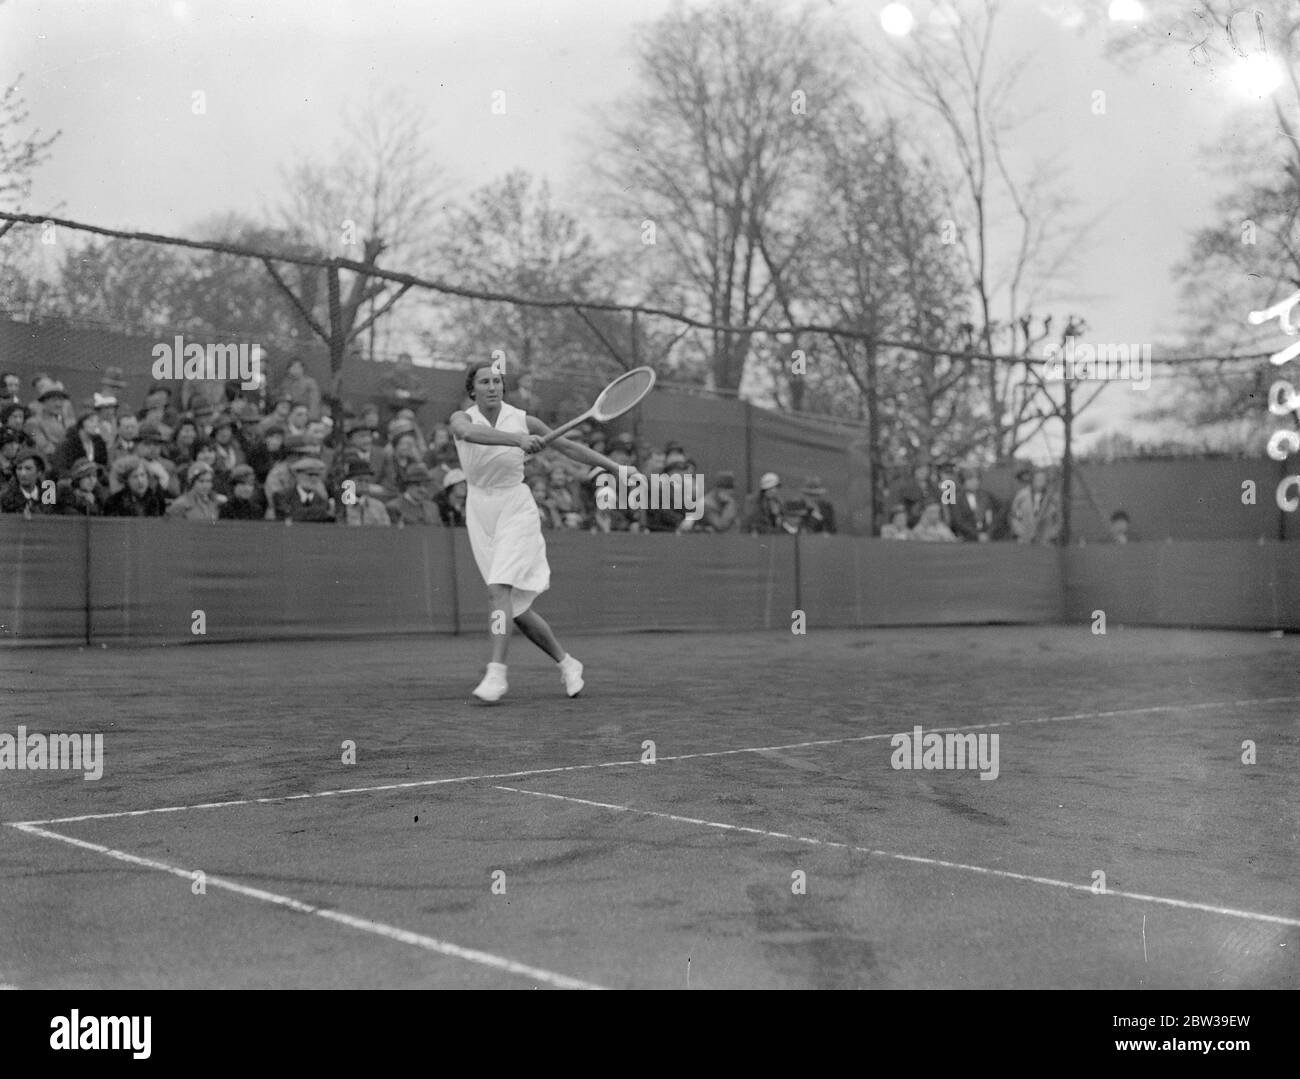 Miss Dorothy Round taking a shot in her tennis match . April 1934 Stock Photo